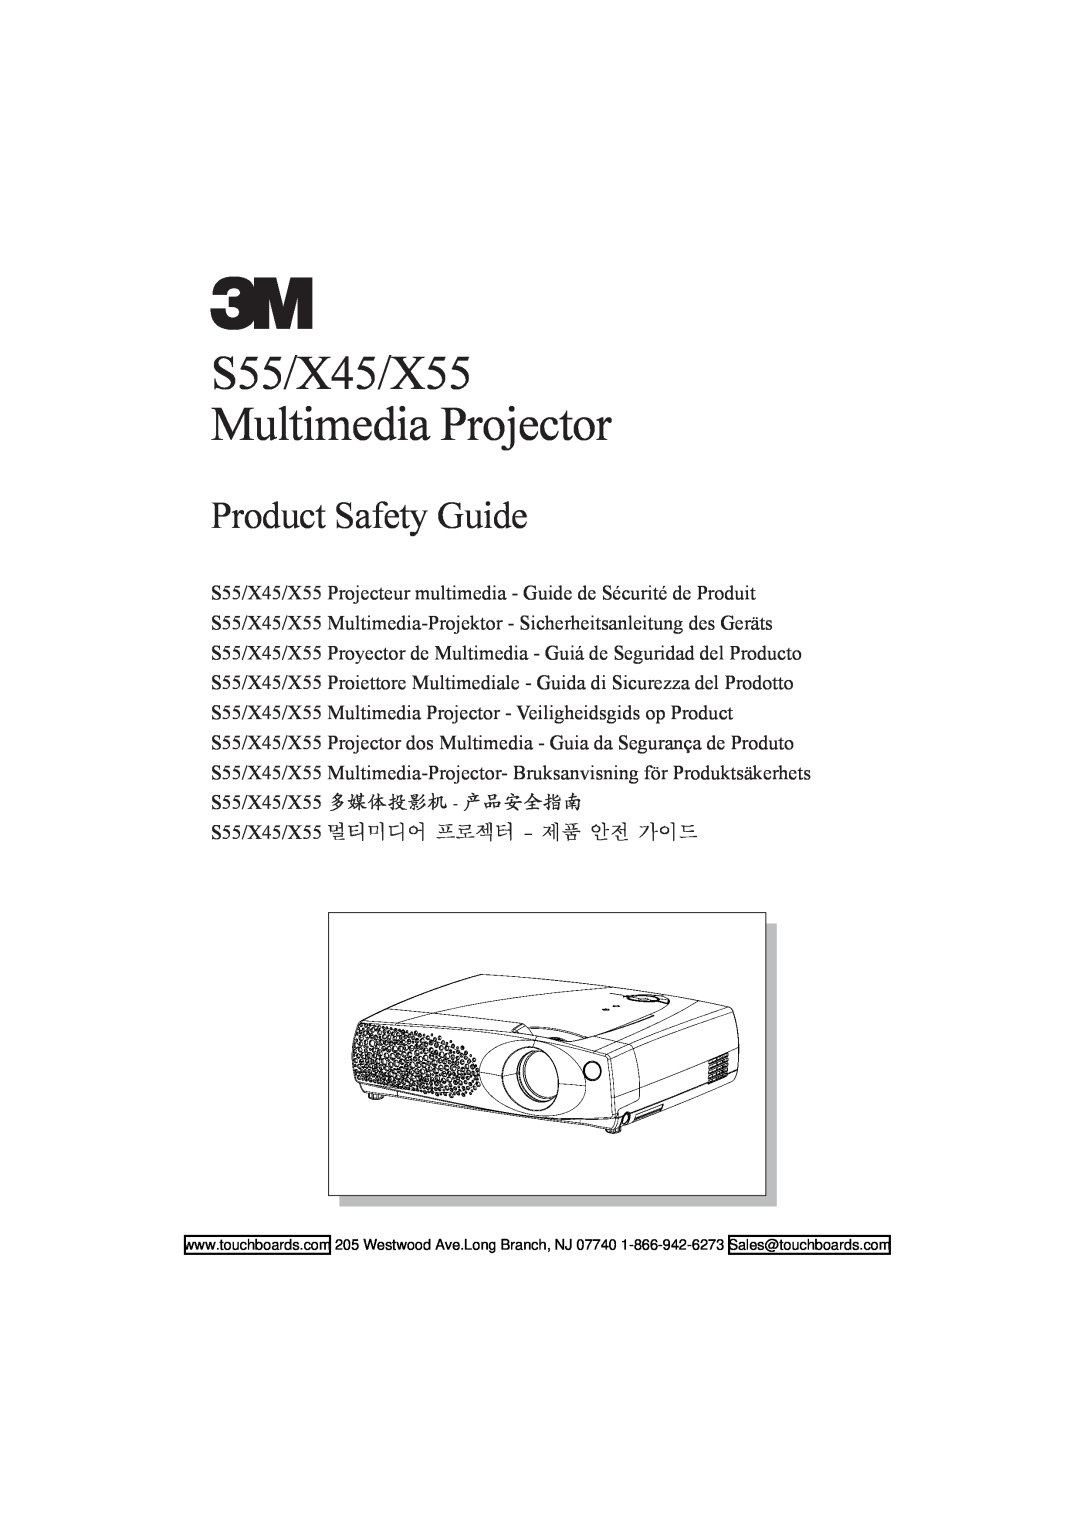 3M manual S55/X45/X55 Multimedia Projector, Product Safety Guide 